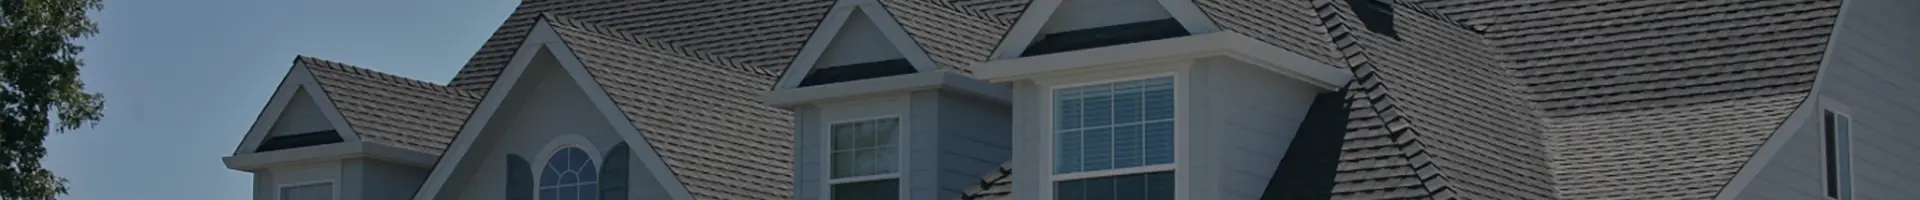 Outdoor Makeover: Roof_Replacement_Filler